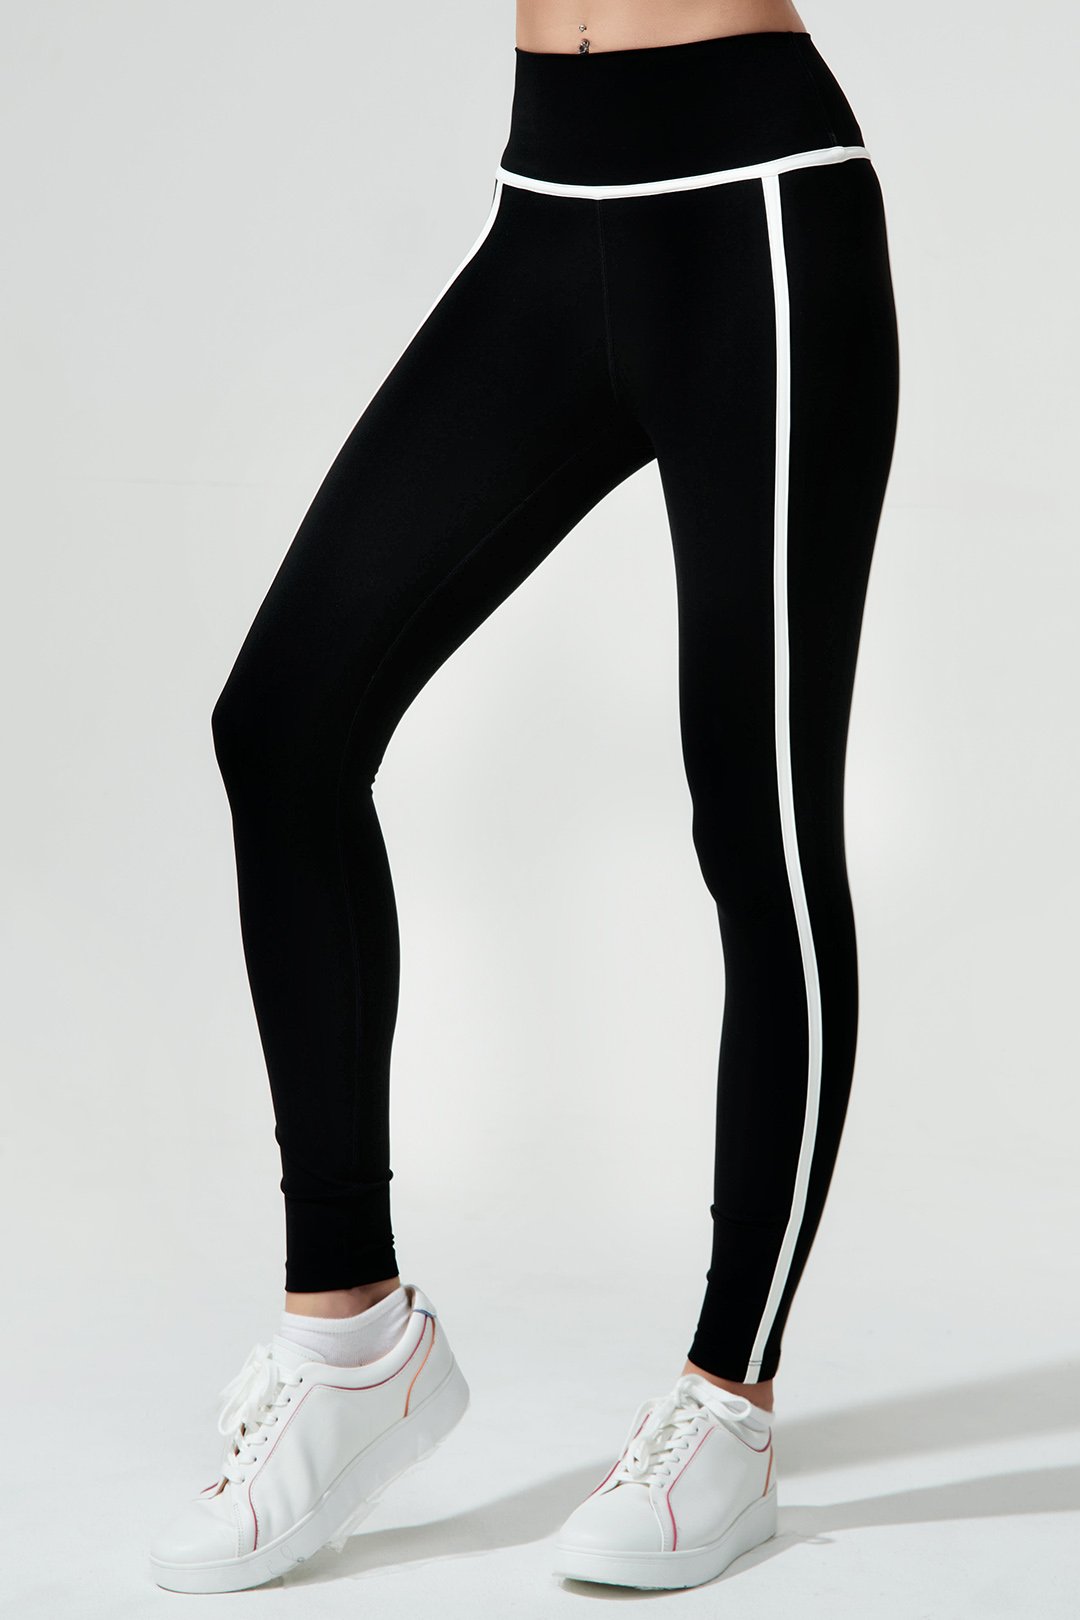 Stylish black women's leggings with a jet black shade - perfect for any occasion.